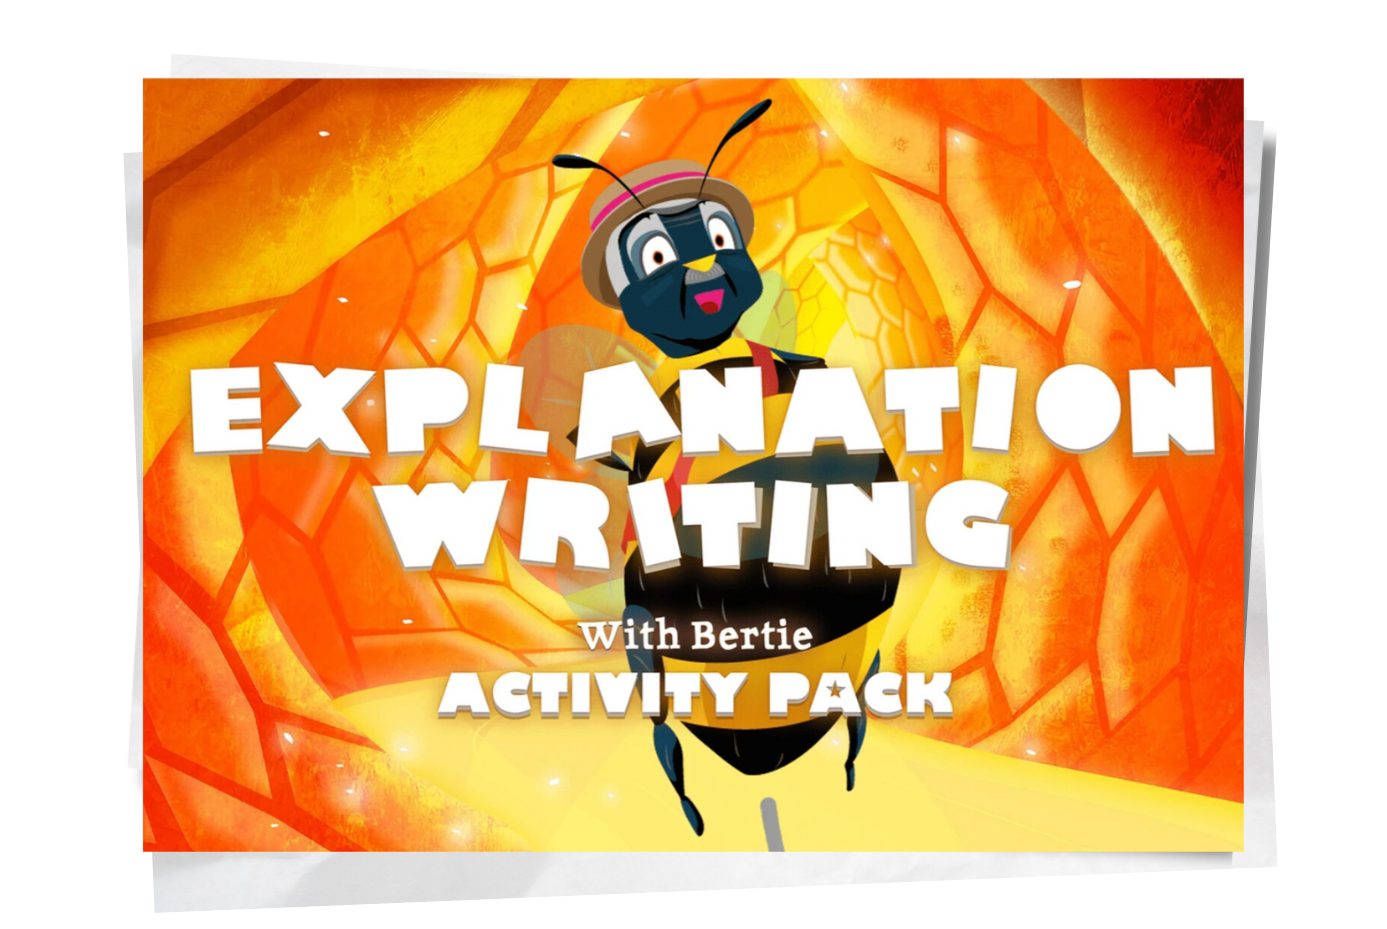 Explanation writing activity pack.